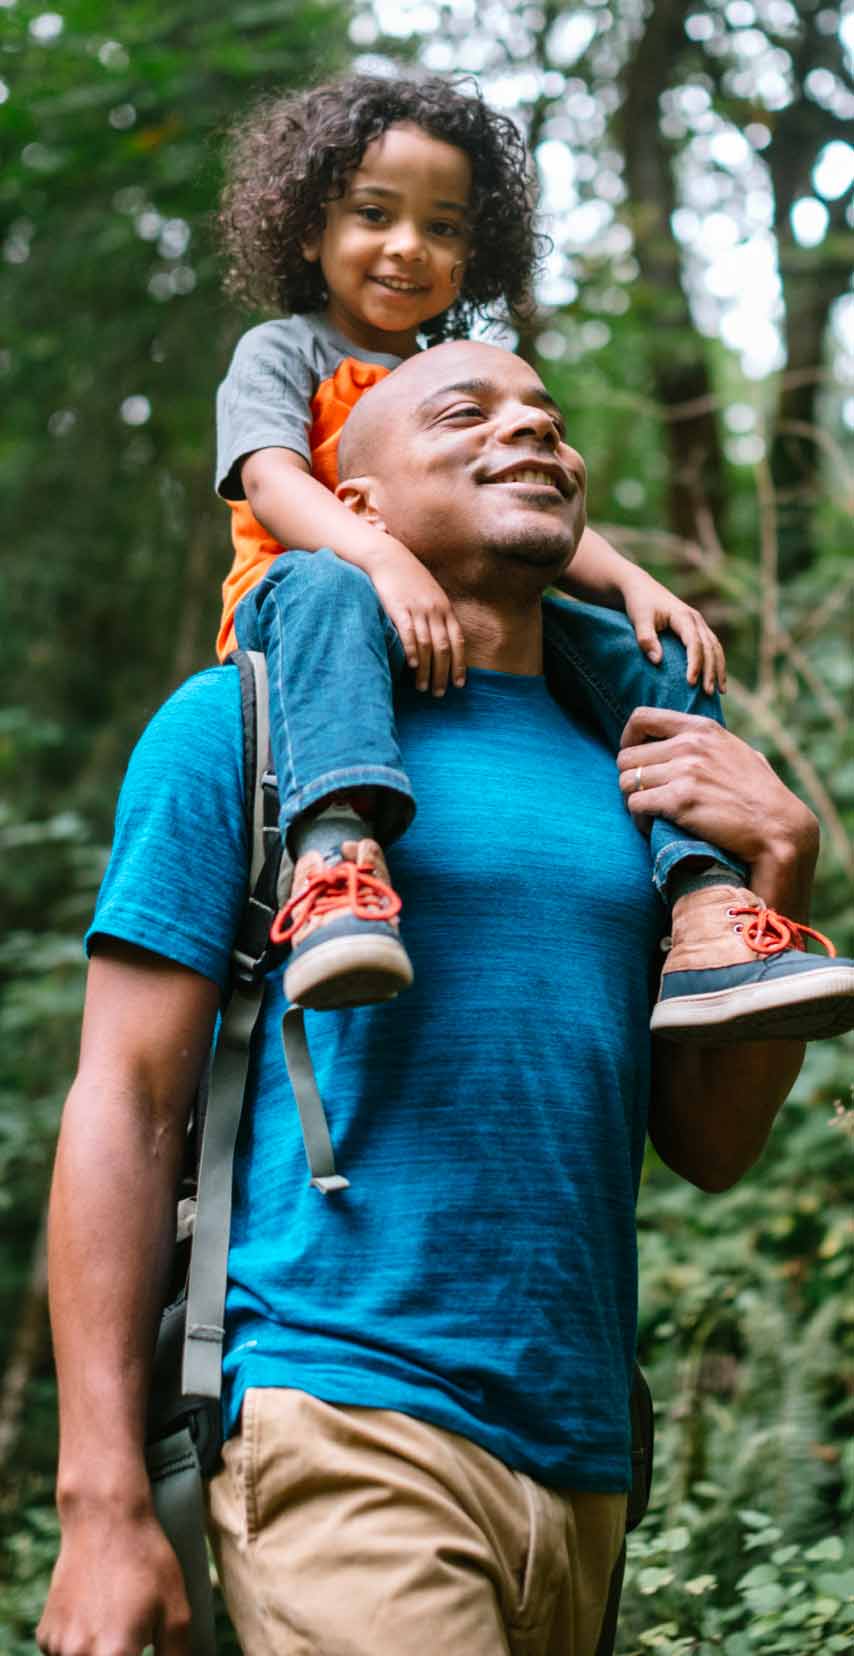 Dad hiking with daughter on shoulders